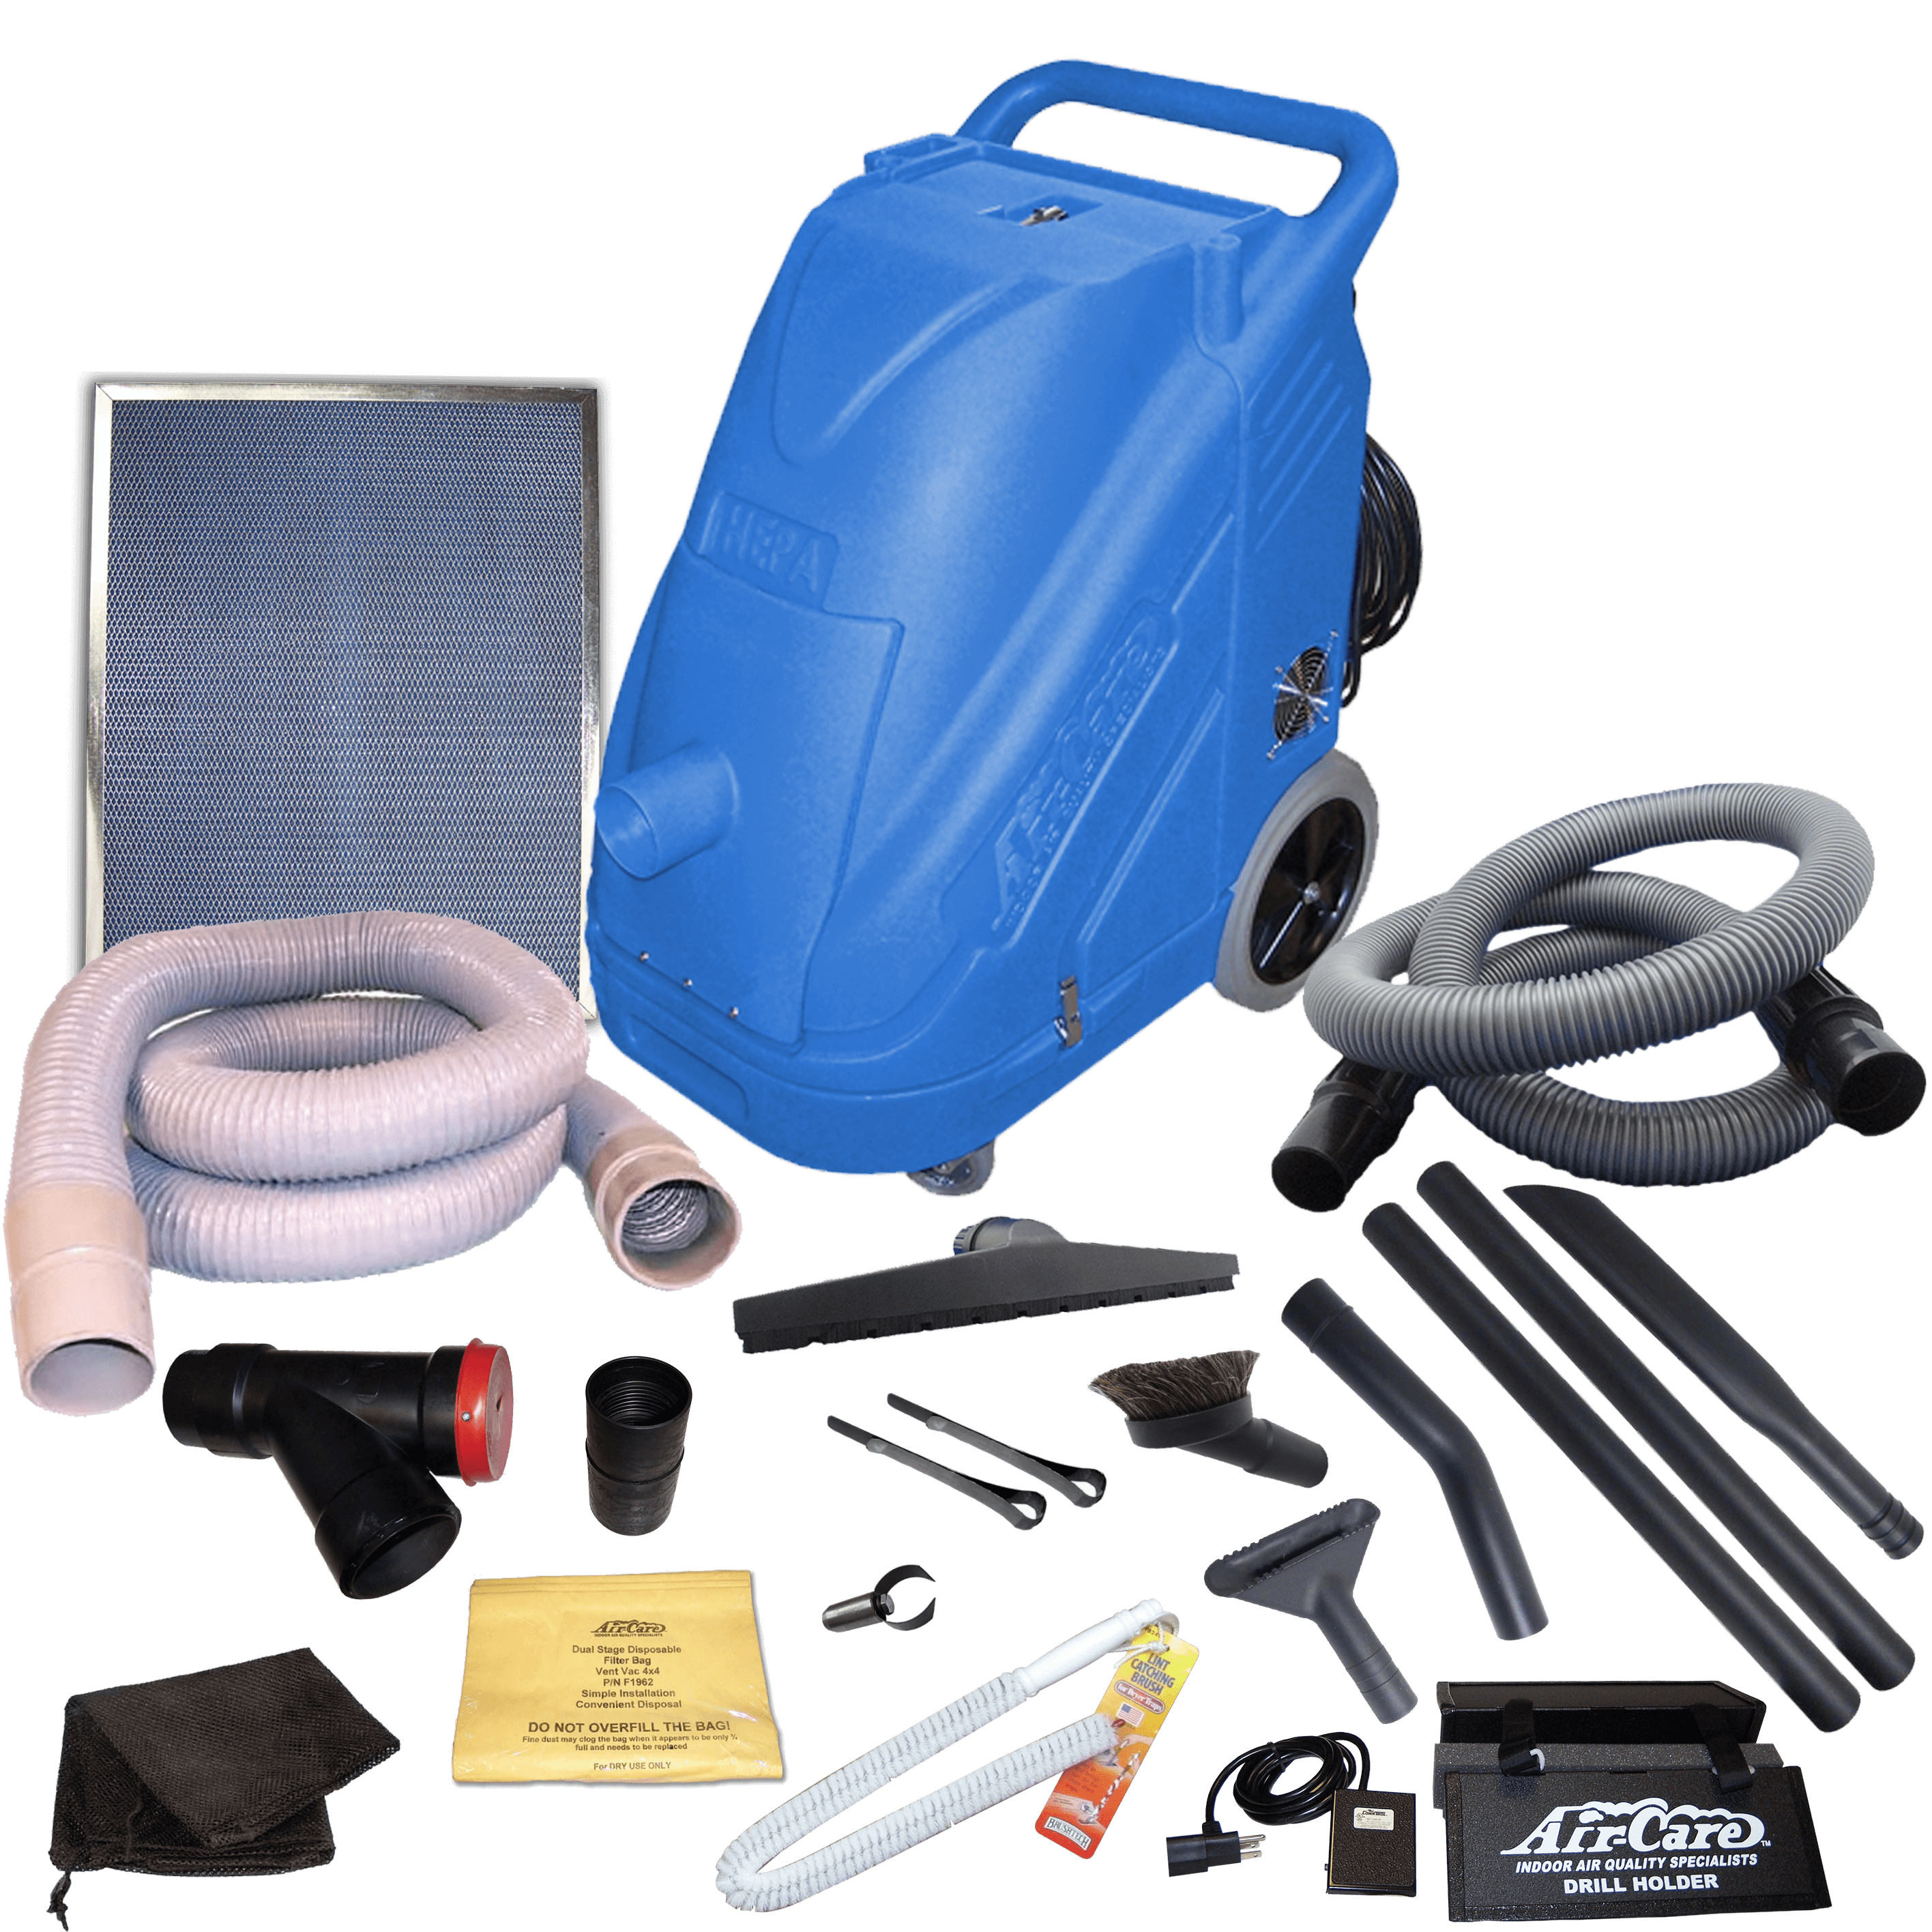 https://www.air-care.com/wp-content/uploads/2020/04/Ventv-Vac-III-dryer-vent-cleaning-Package.png